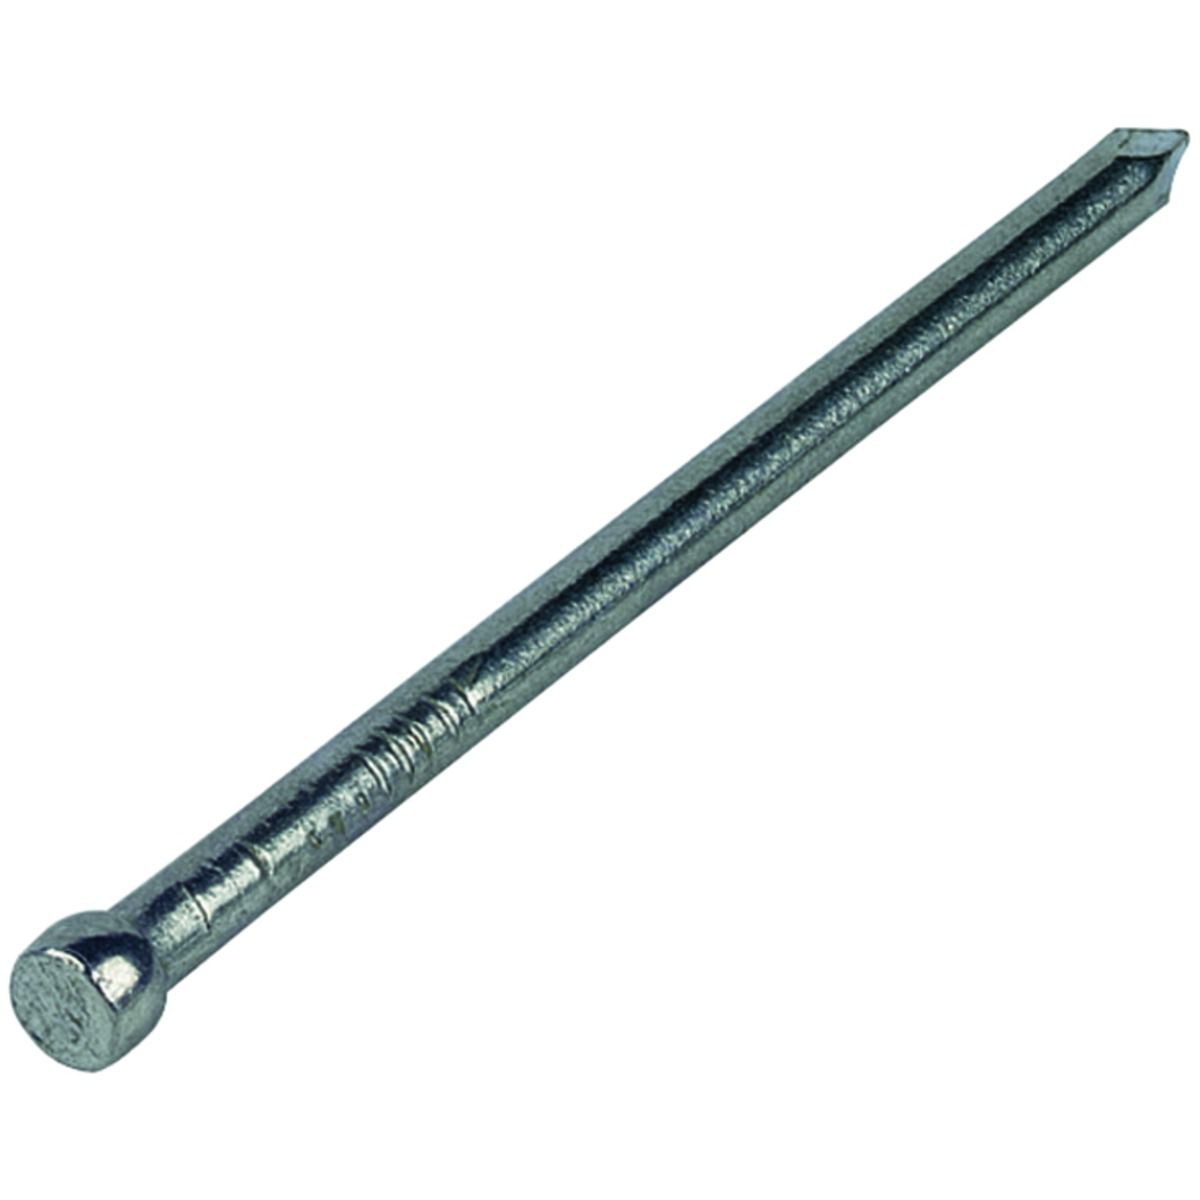 Image of Wickes 60mm Bright Lost Head Nails - 400g